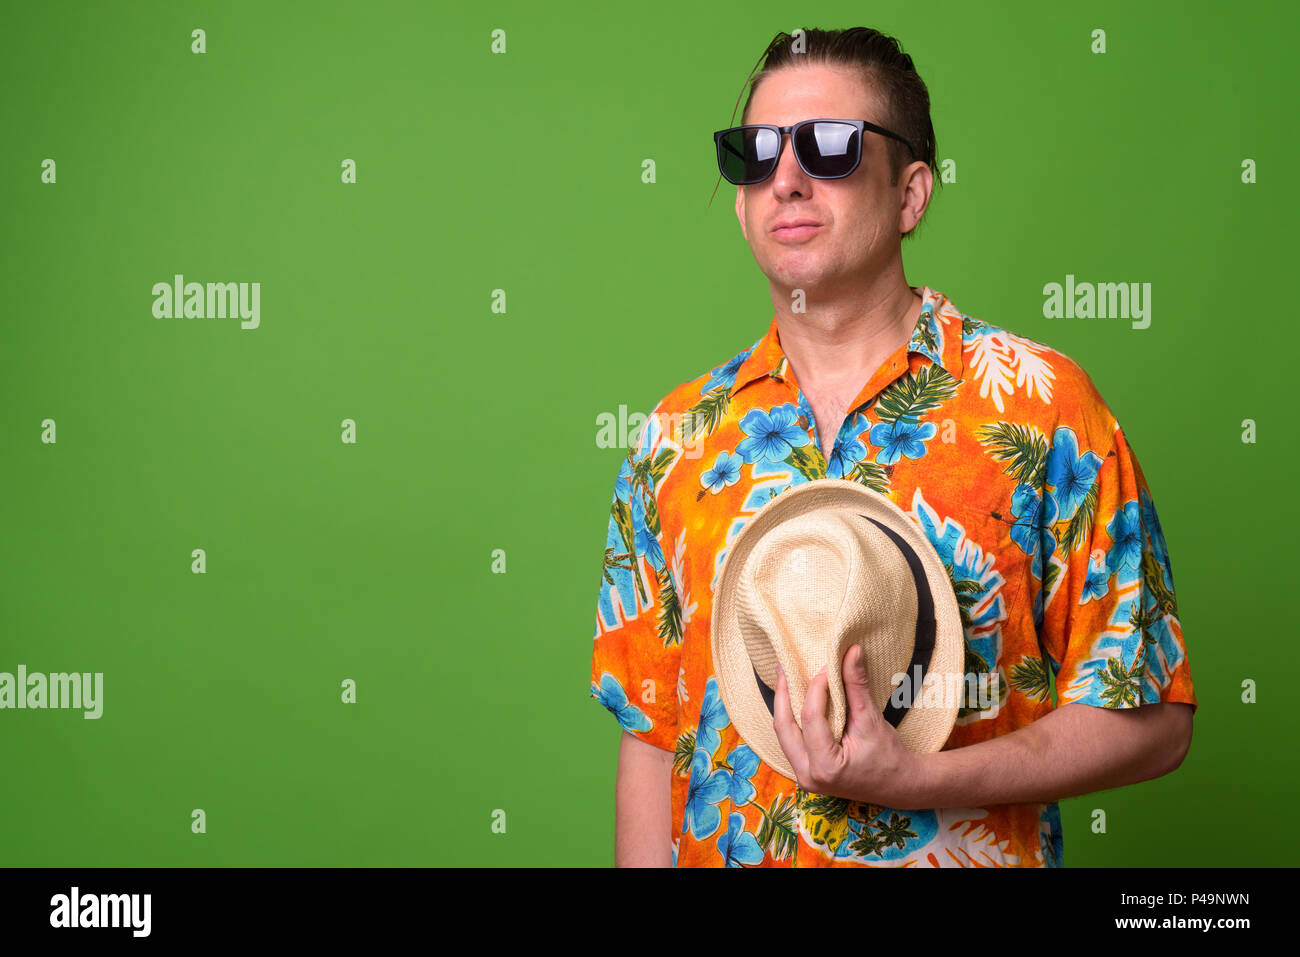 Mature tourist man ready for vacation against green background Stock Photo